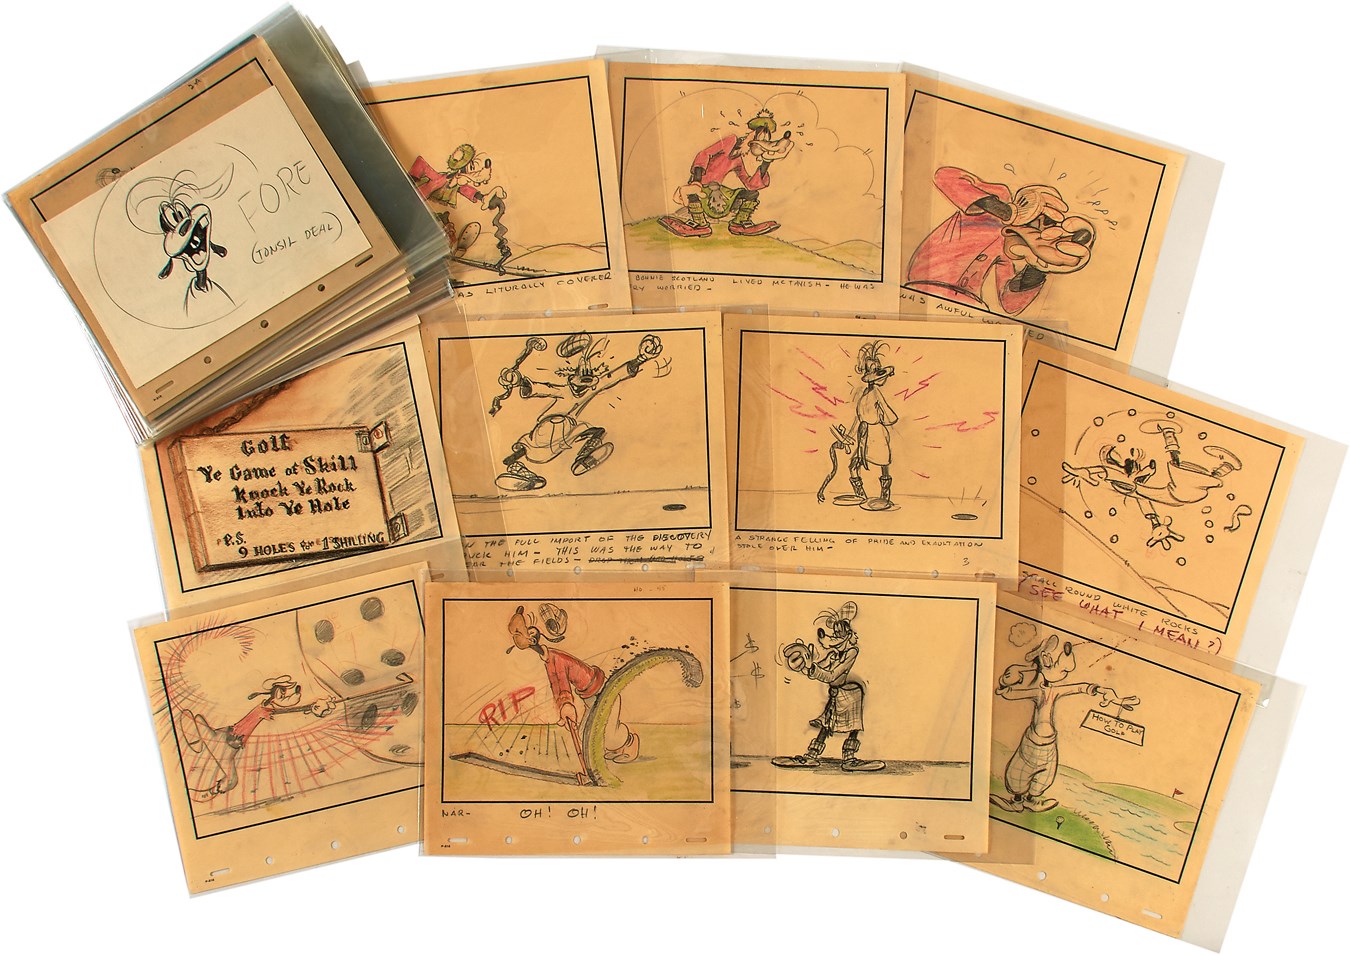 Pop Culture Autographs - 1941 Goofy "How to Play Golf" Original Storyboard Drawings (51)